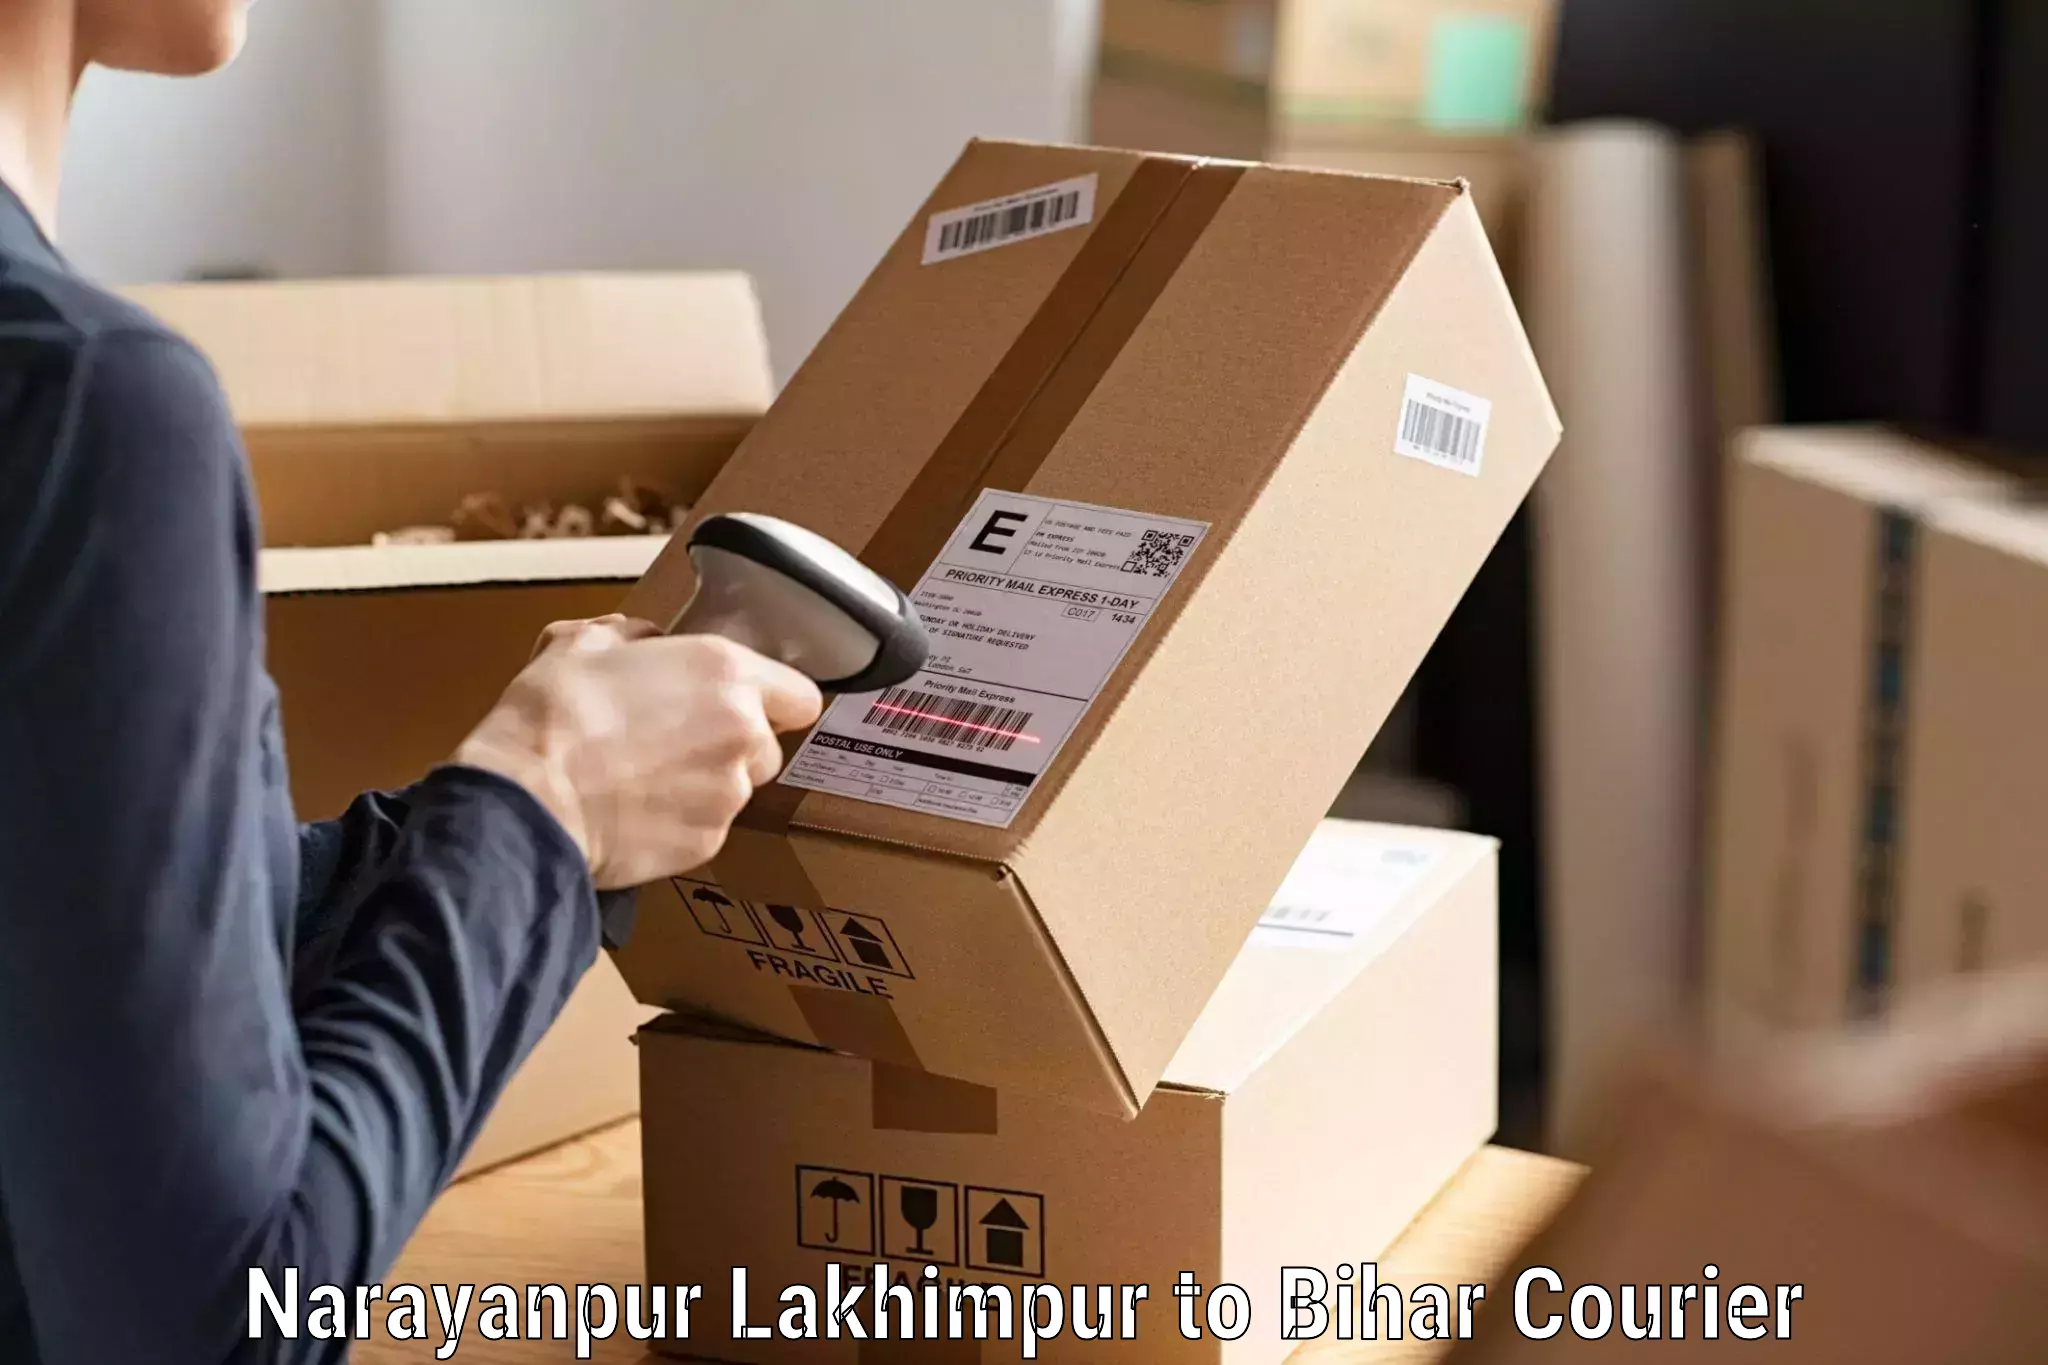 Quality courier services in Narayanpur Lakhimpur to Sonbarsa